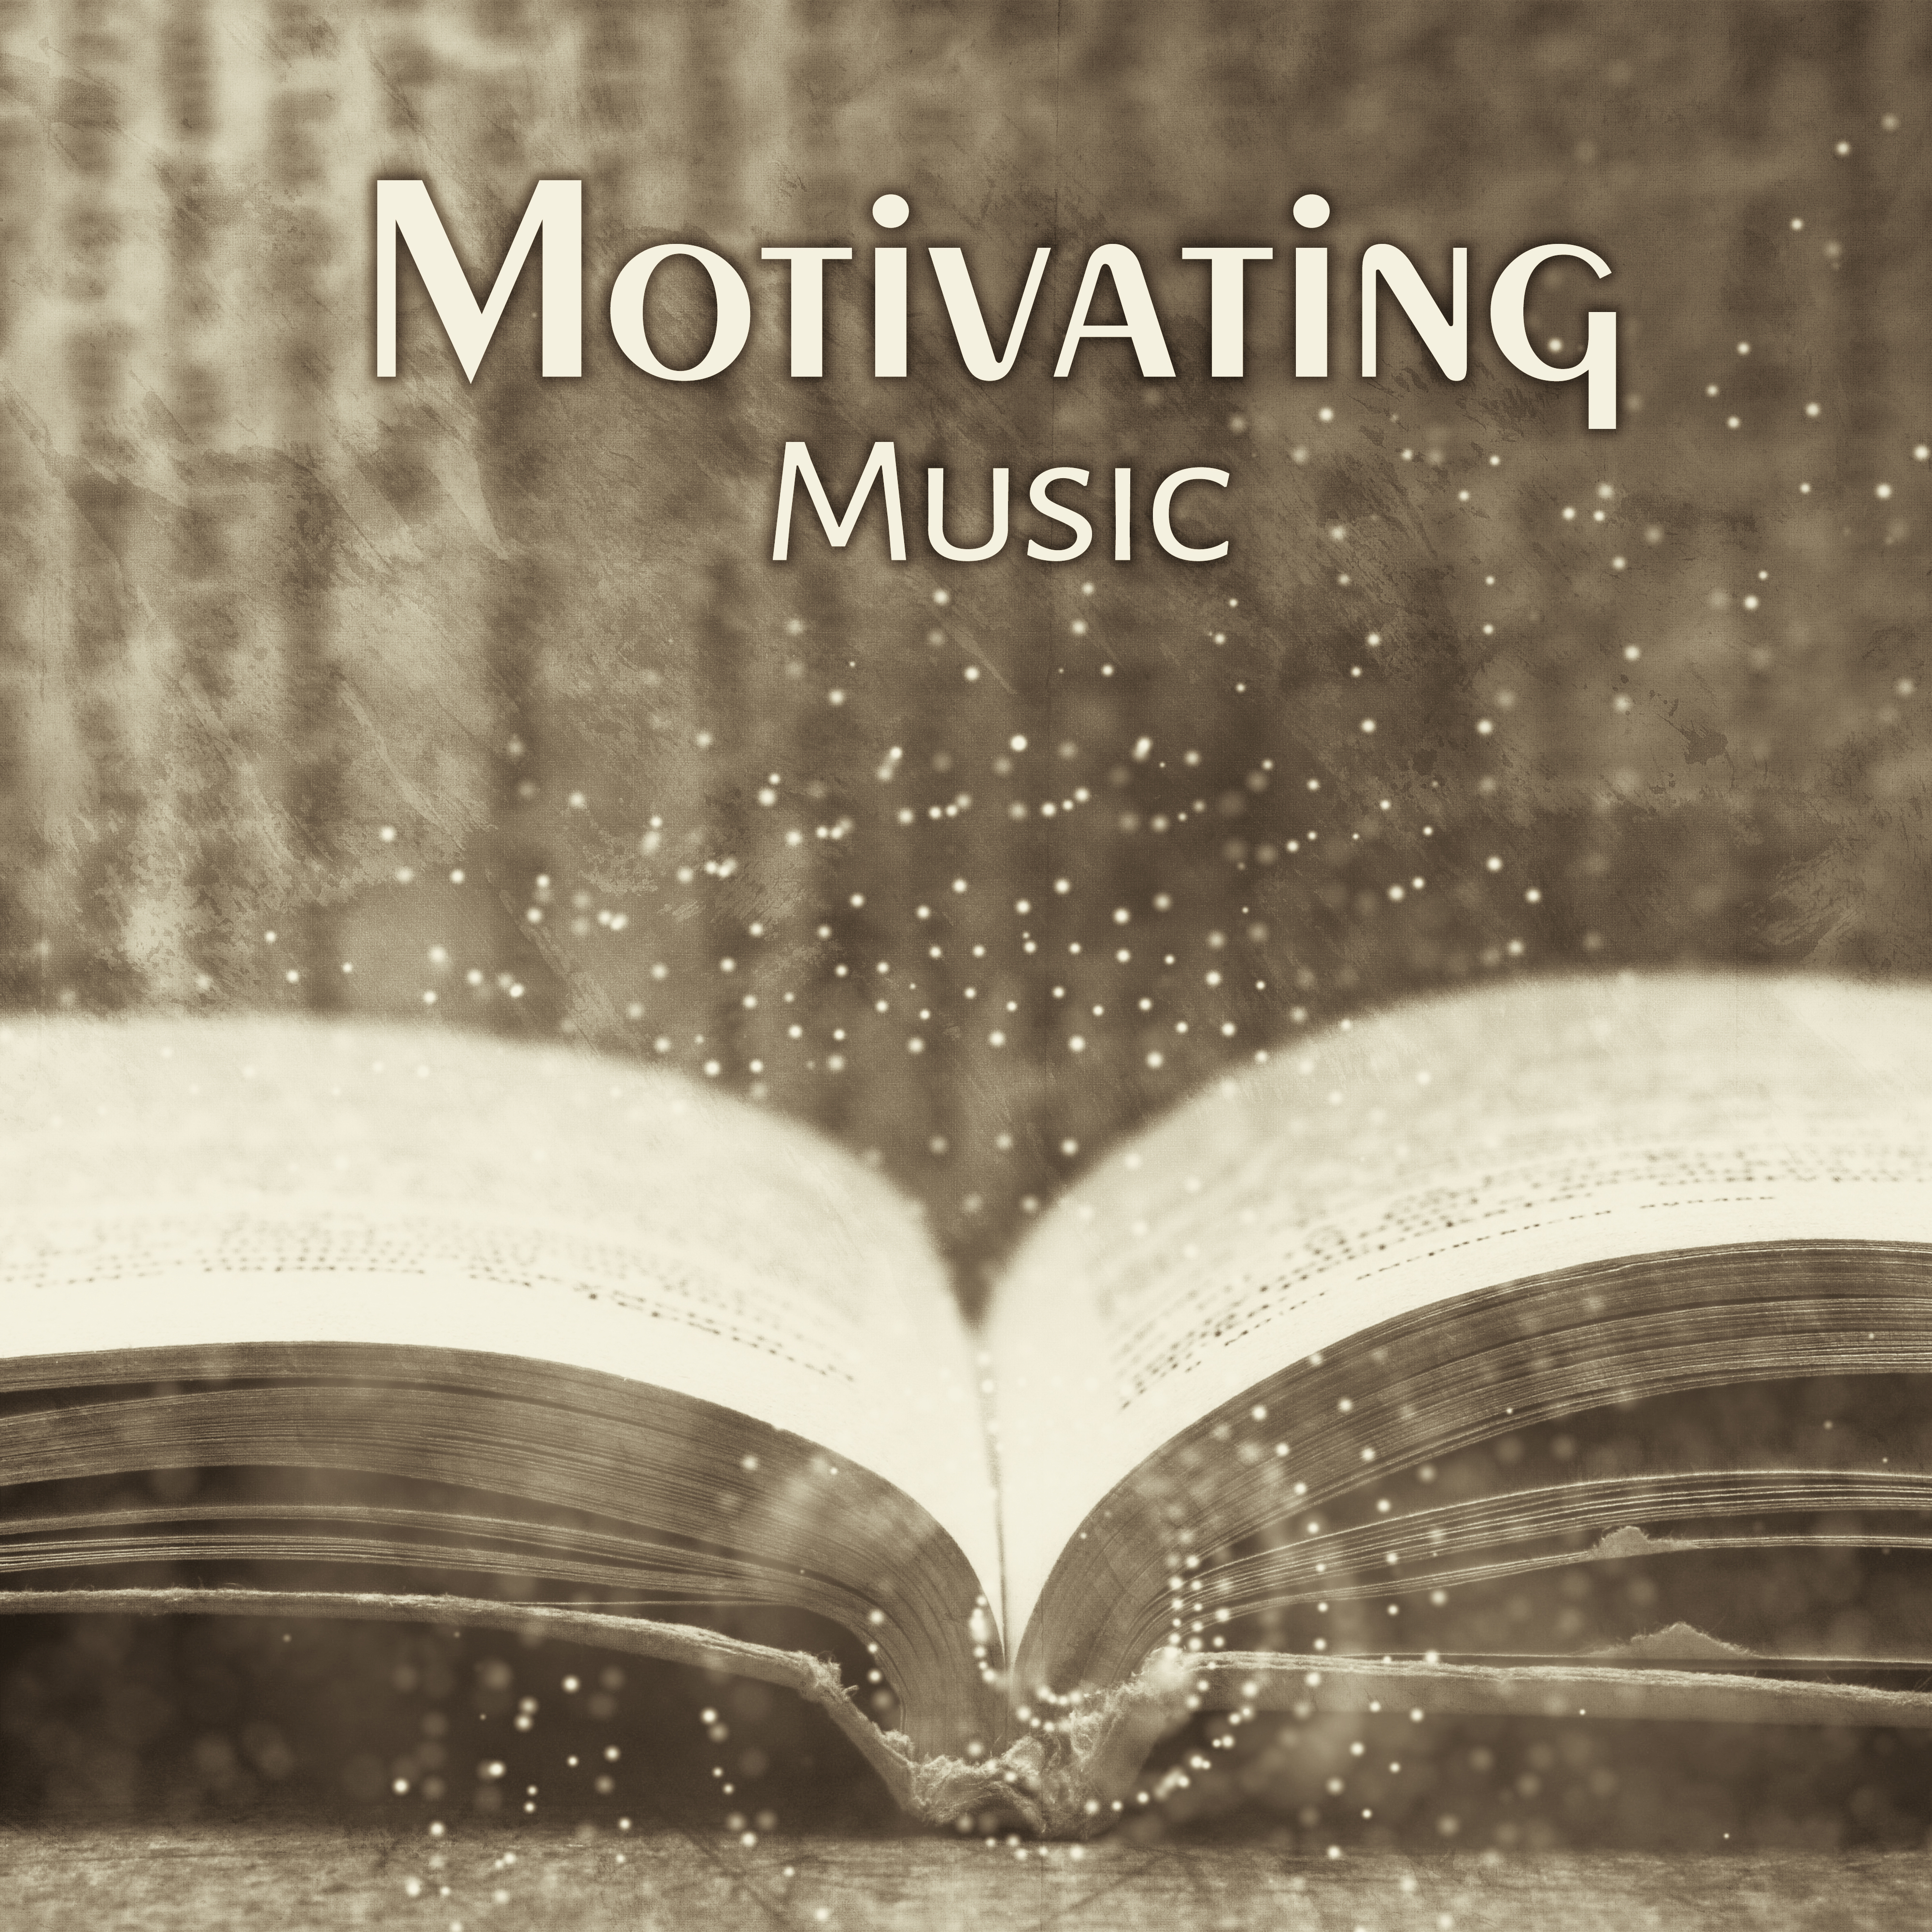 Motivating Music  Calming Sounds of Nature, Helpful for Keeep Focus on the Task, Music for Learning, Relaxing Songs